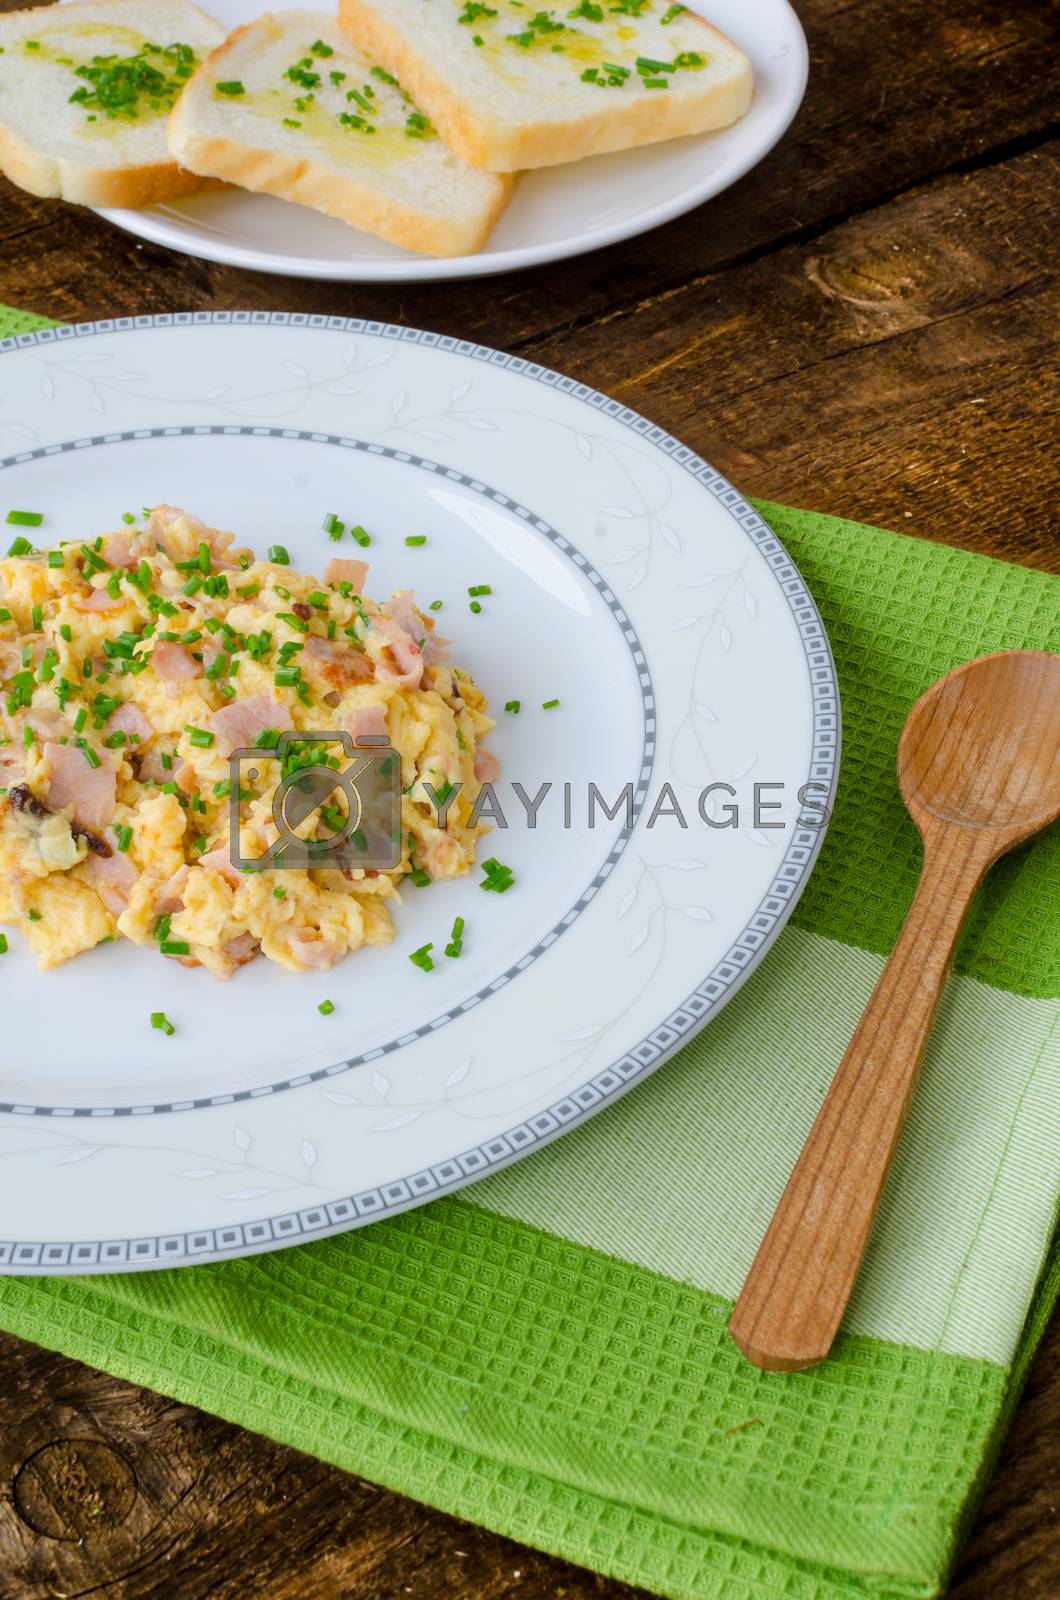 Royalty free image of Scrambled eggs with chive and bacon, toast with herbs by Peteer